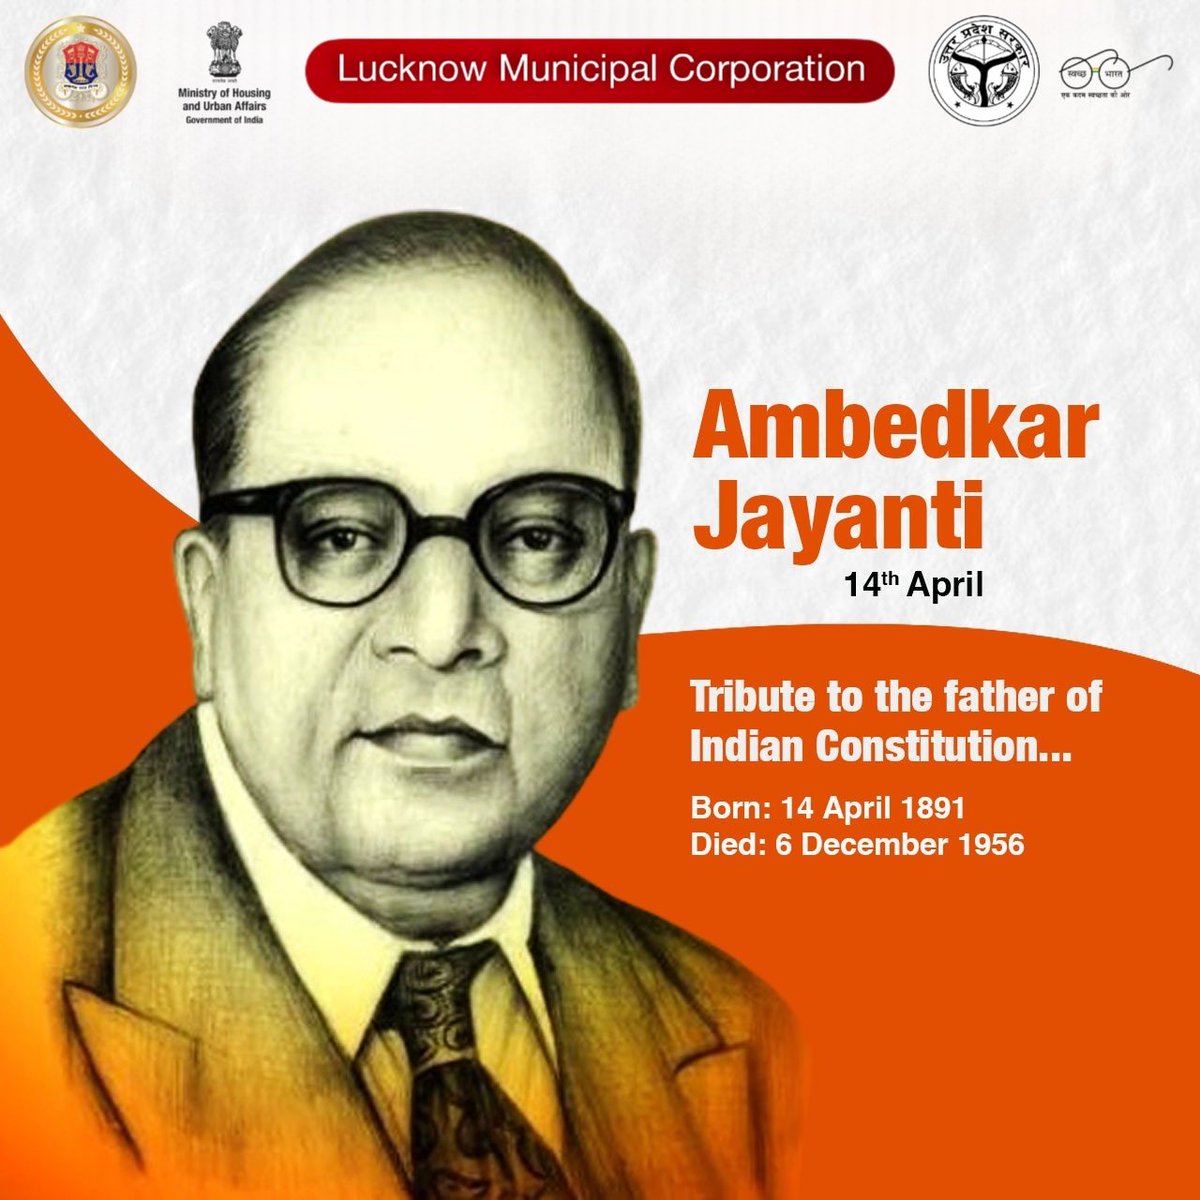 #LMC pays tribute to the visionary architect of modern India, Dr. B.R. Ambedkar, on his birth anniversary. As we celebrate #AmbedkarJayanti, let's honour his pioneering vision that laid the foundation for a progressive and inclusive republic. @SBM_UP @NagarVikas_UP @UPGovt